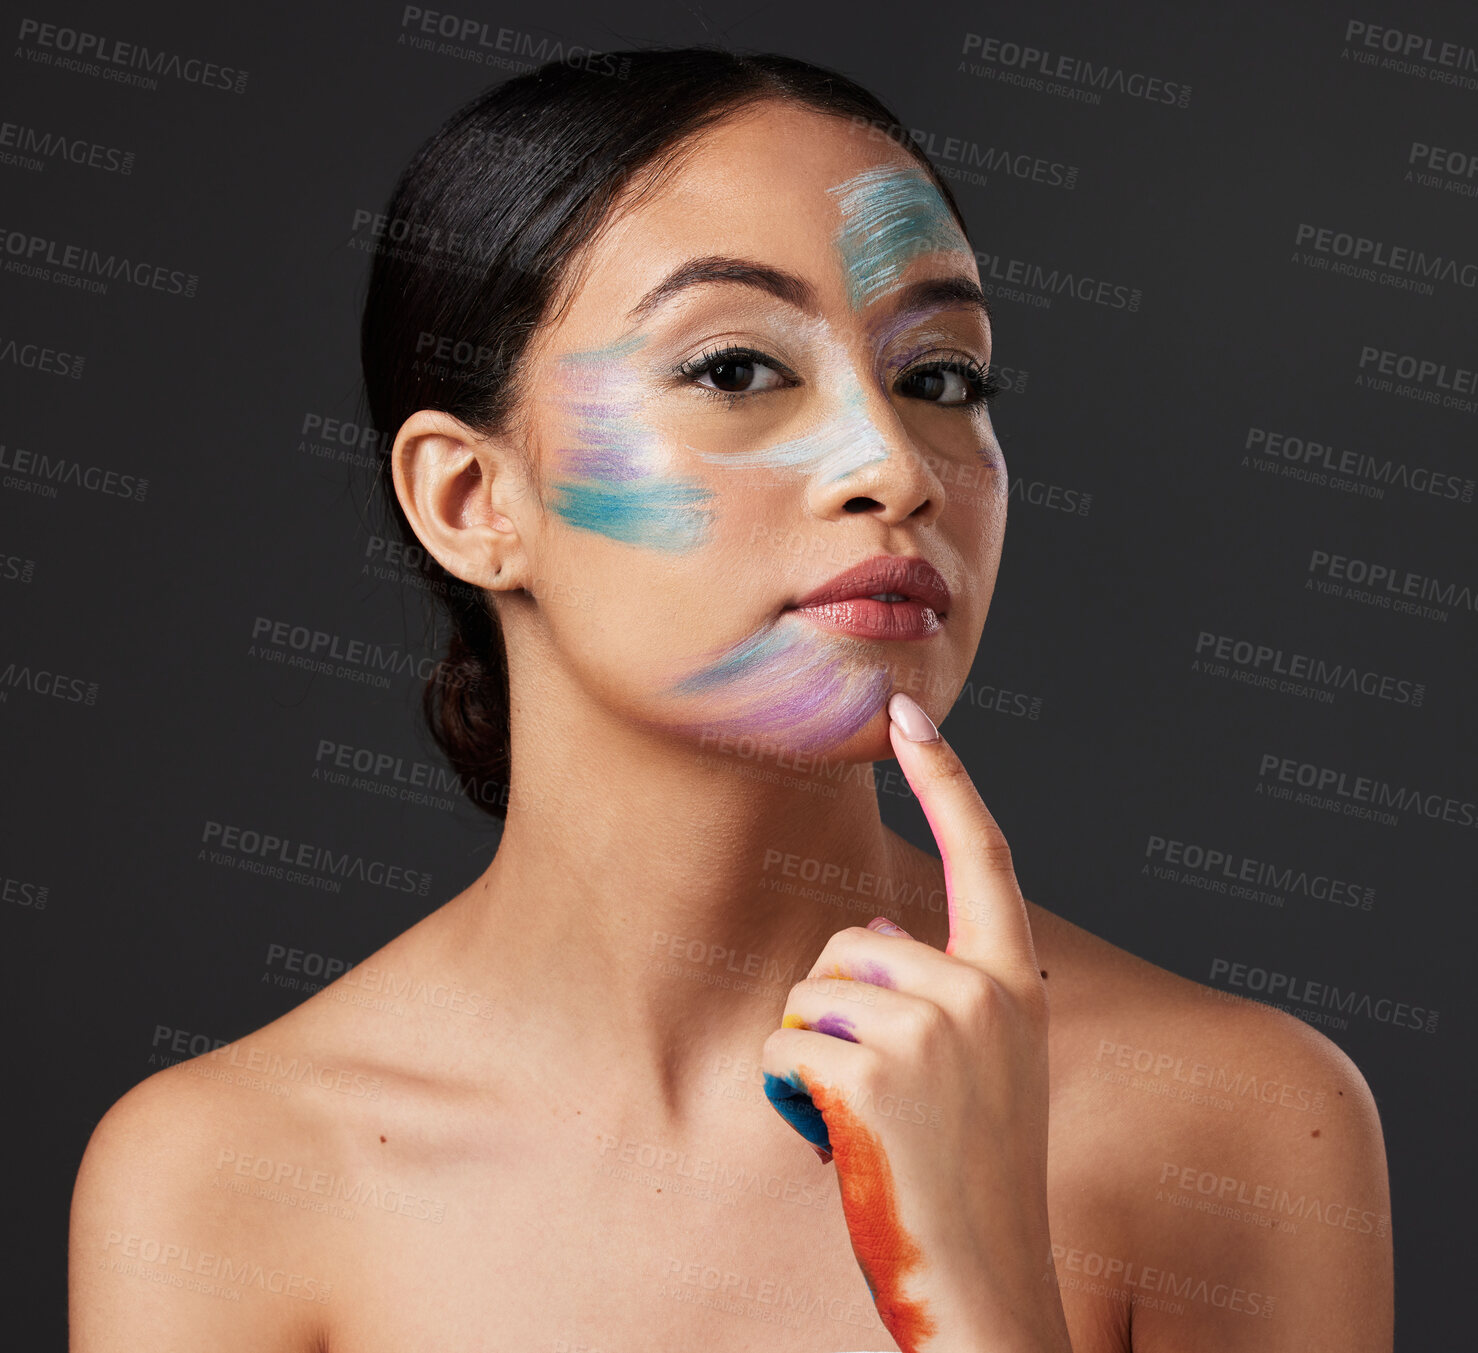 Buy stock photo Skin, art and portrait of woman with face paint, creative makeup and self expression. Beauty, creativity and color in artistic cosmetics, empowerment and freedom to express for young beautiful girl.